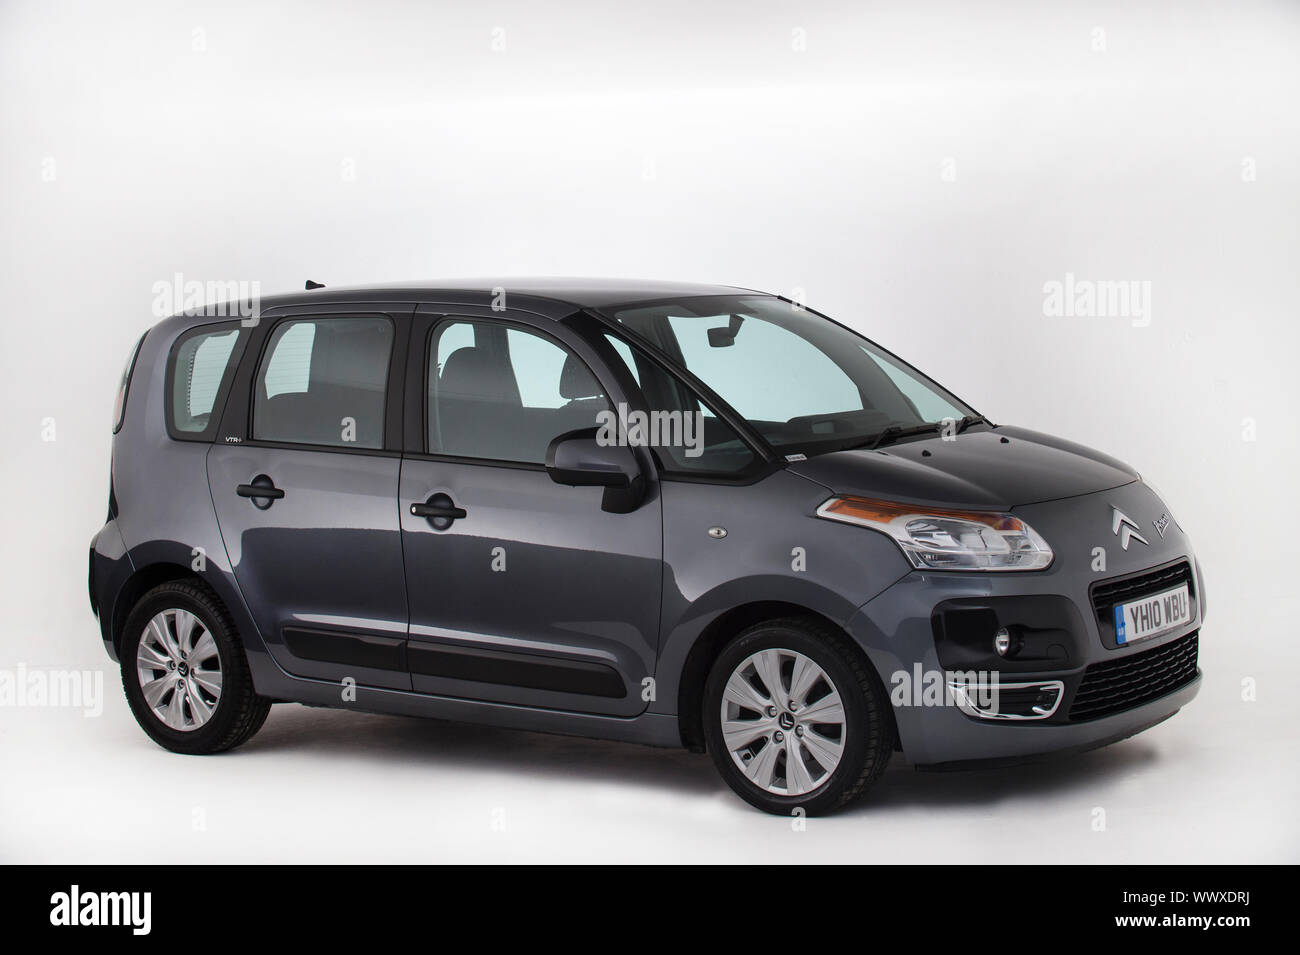 Citroen Picasso Car High Resolution Stock Photography And Images - Alamy